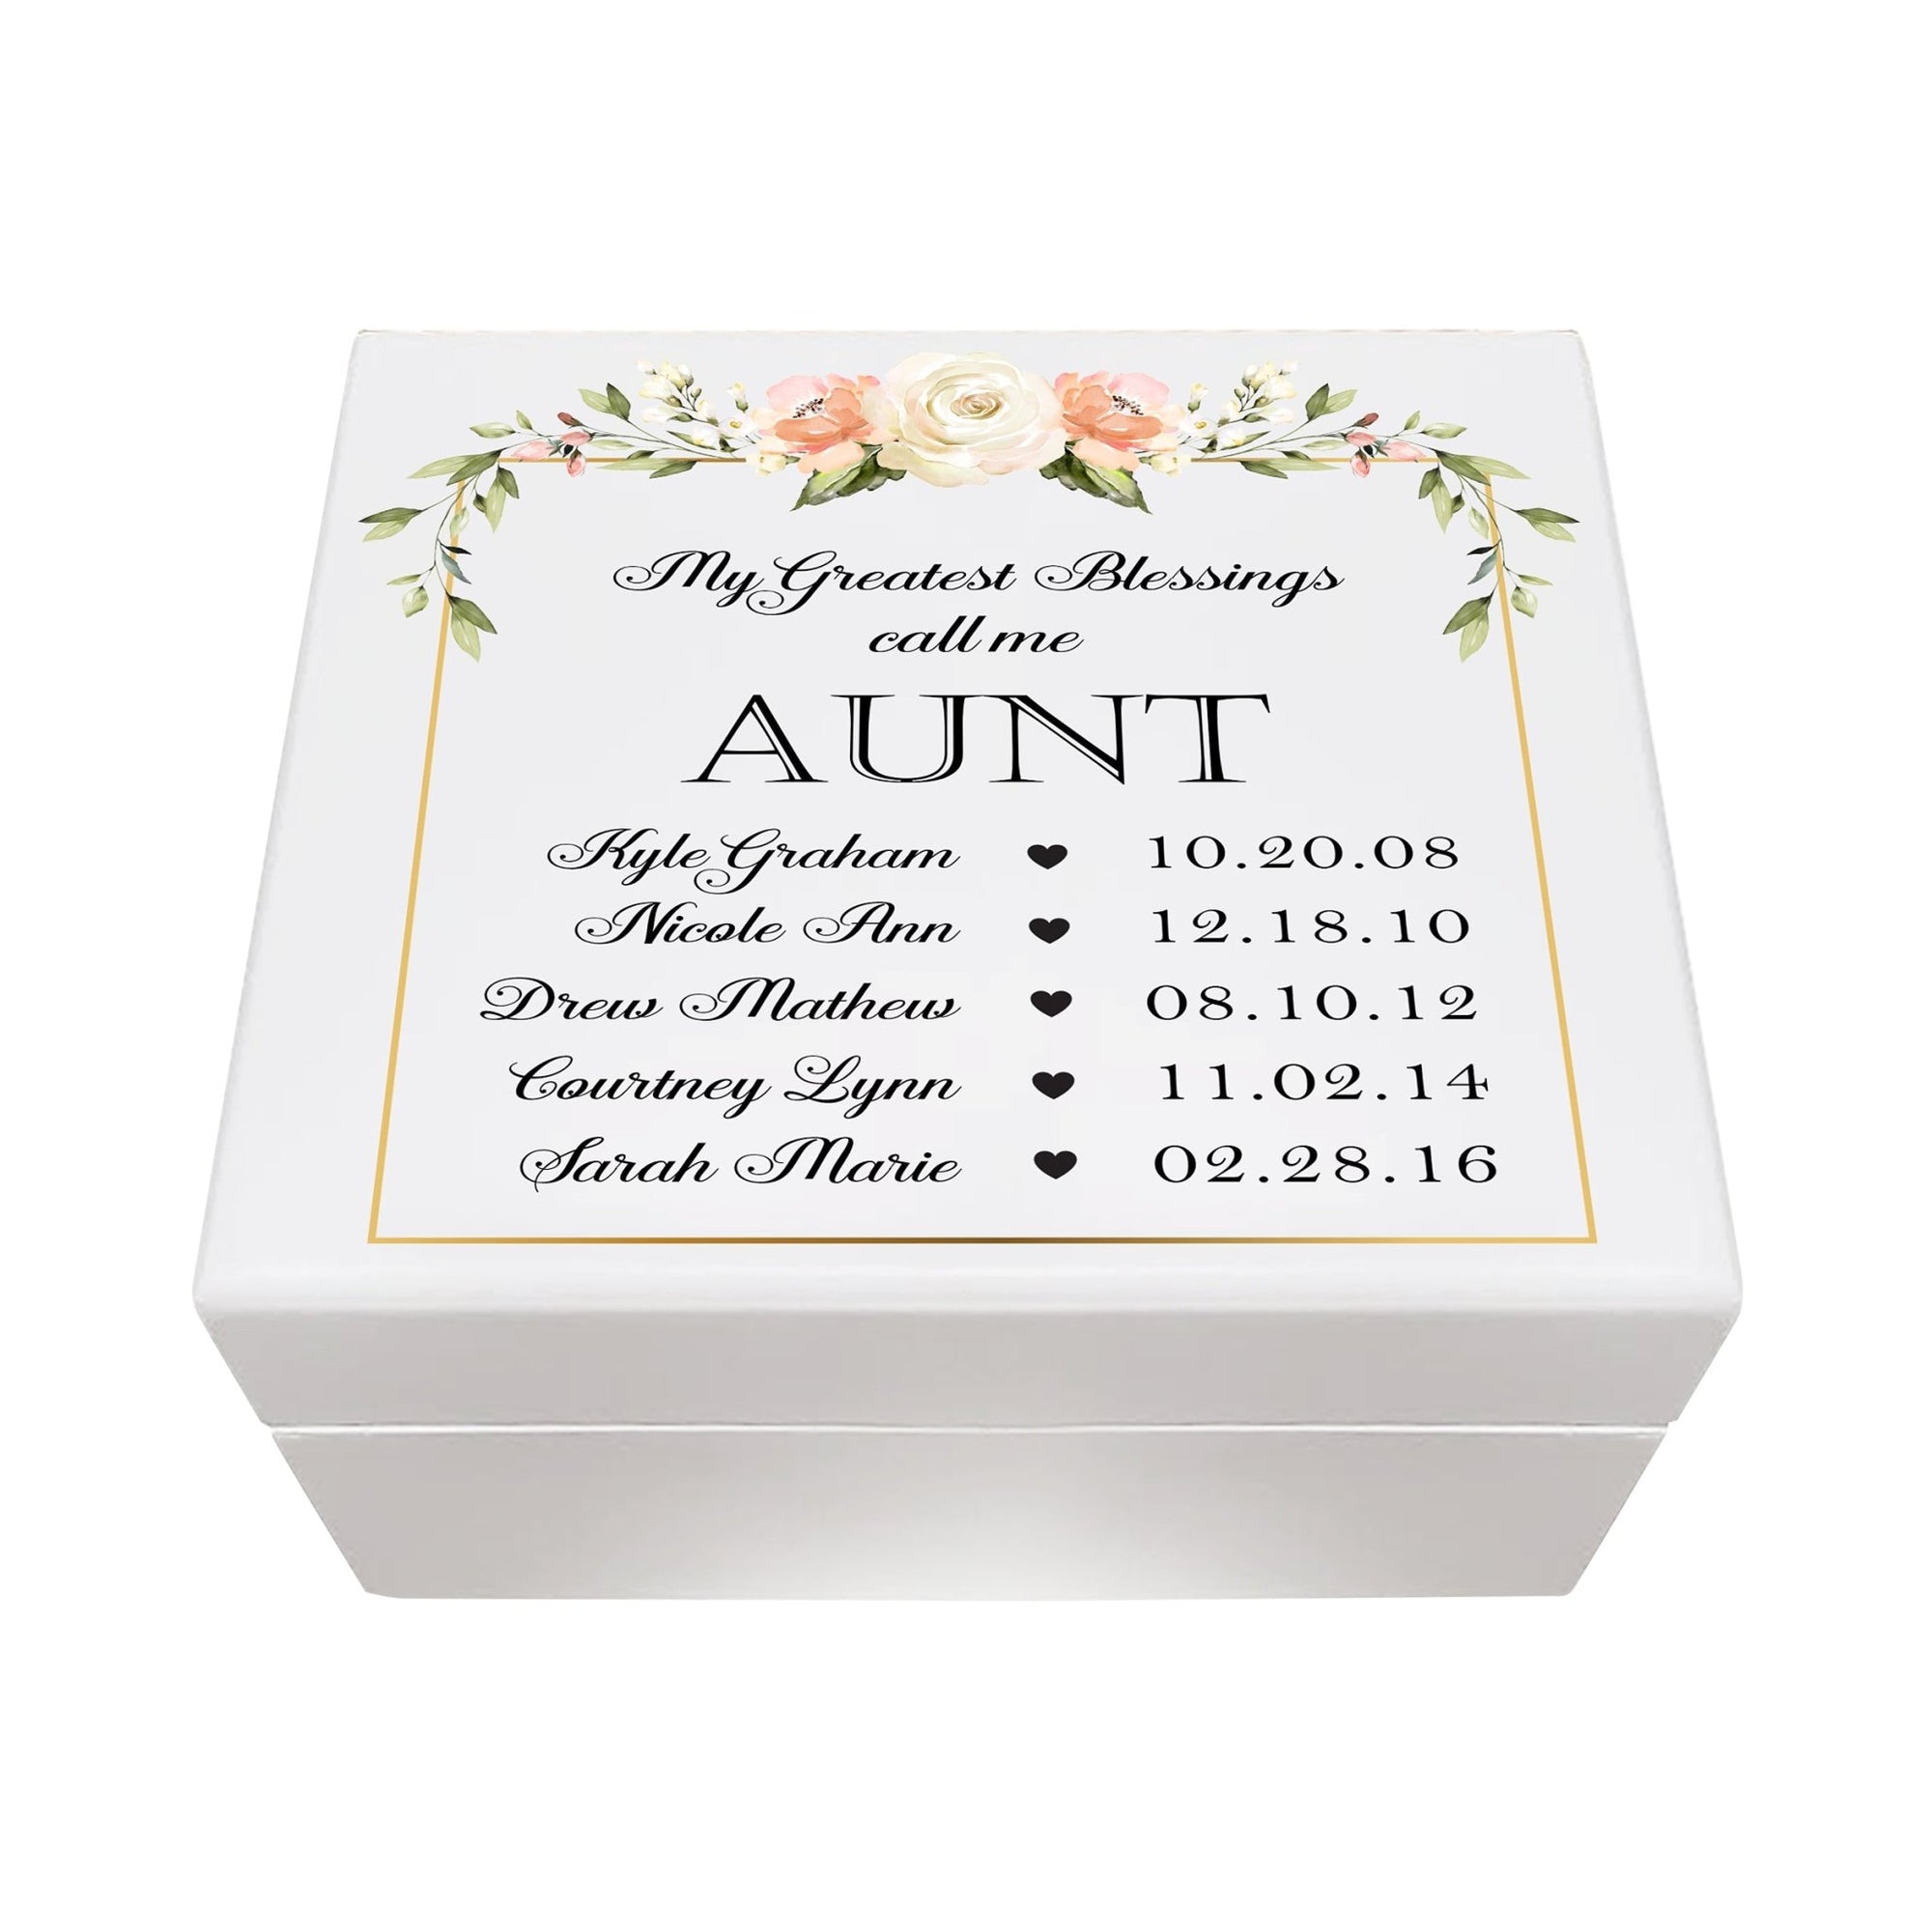 Personalized Memorable Aunt’s White Keepsake Box 6x5.5in with inspiring verse - Greatest Blessings - LifeSong Milestones